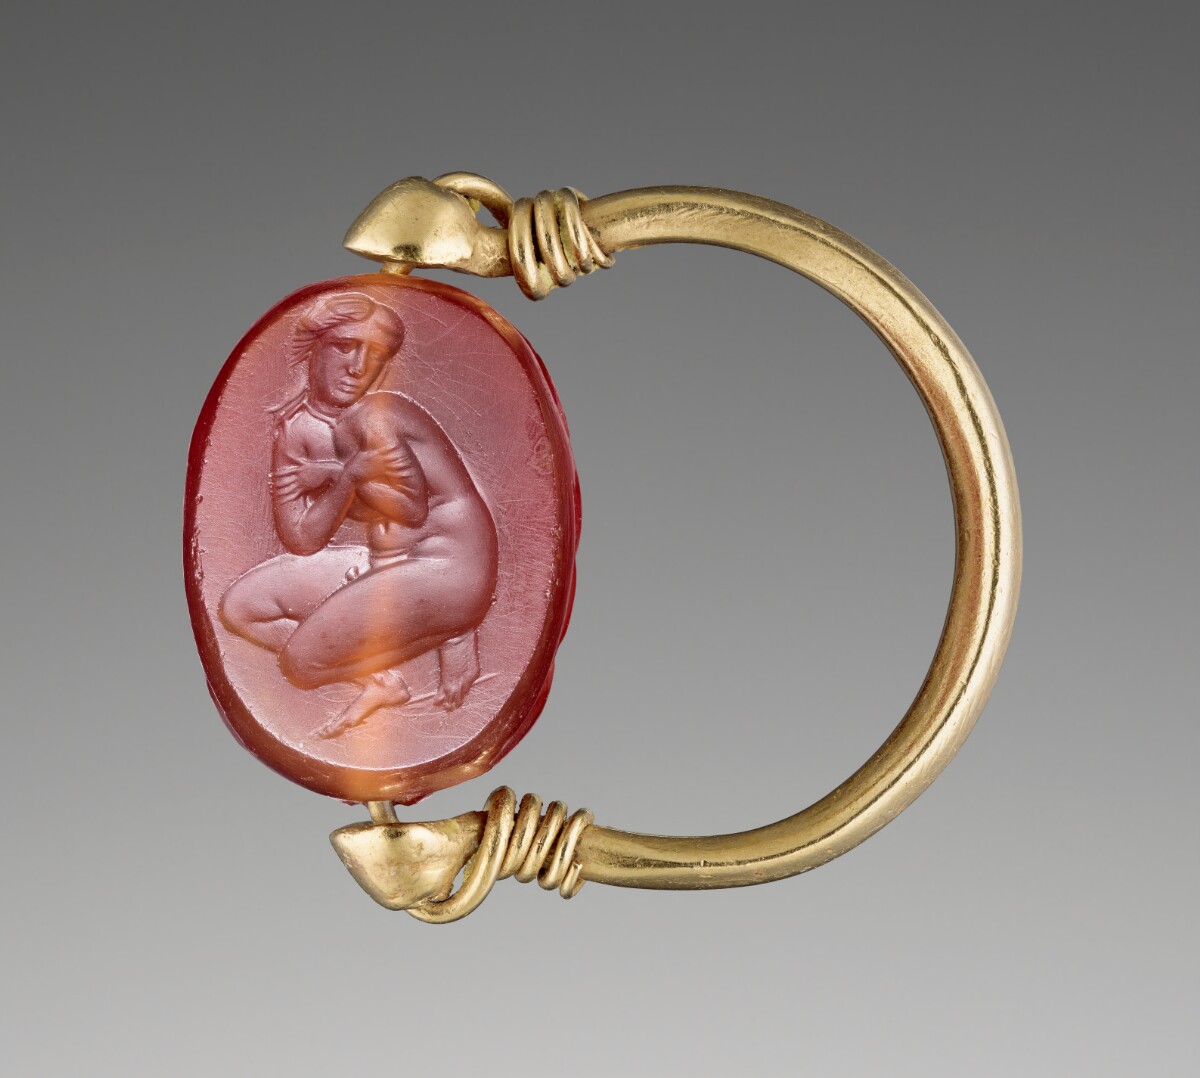 A red gem with a nude woman and gold band